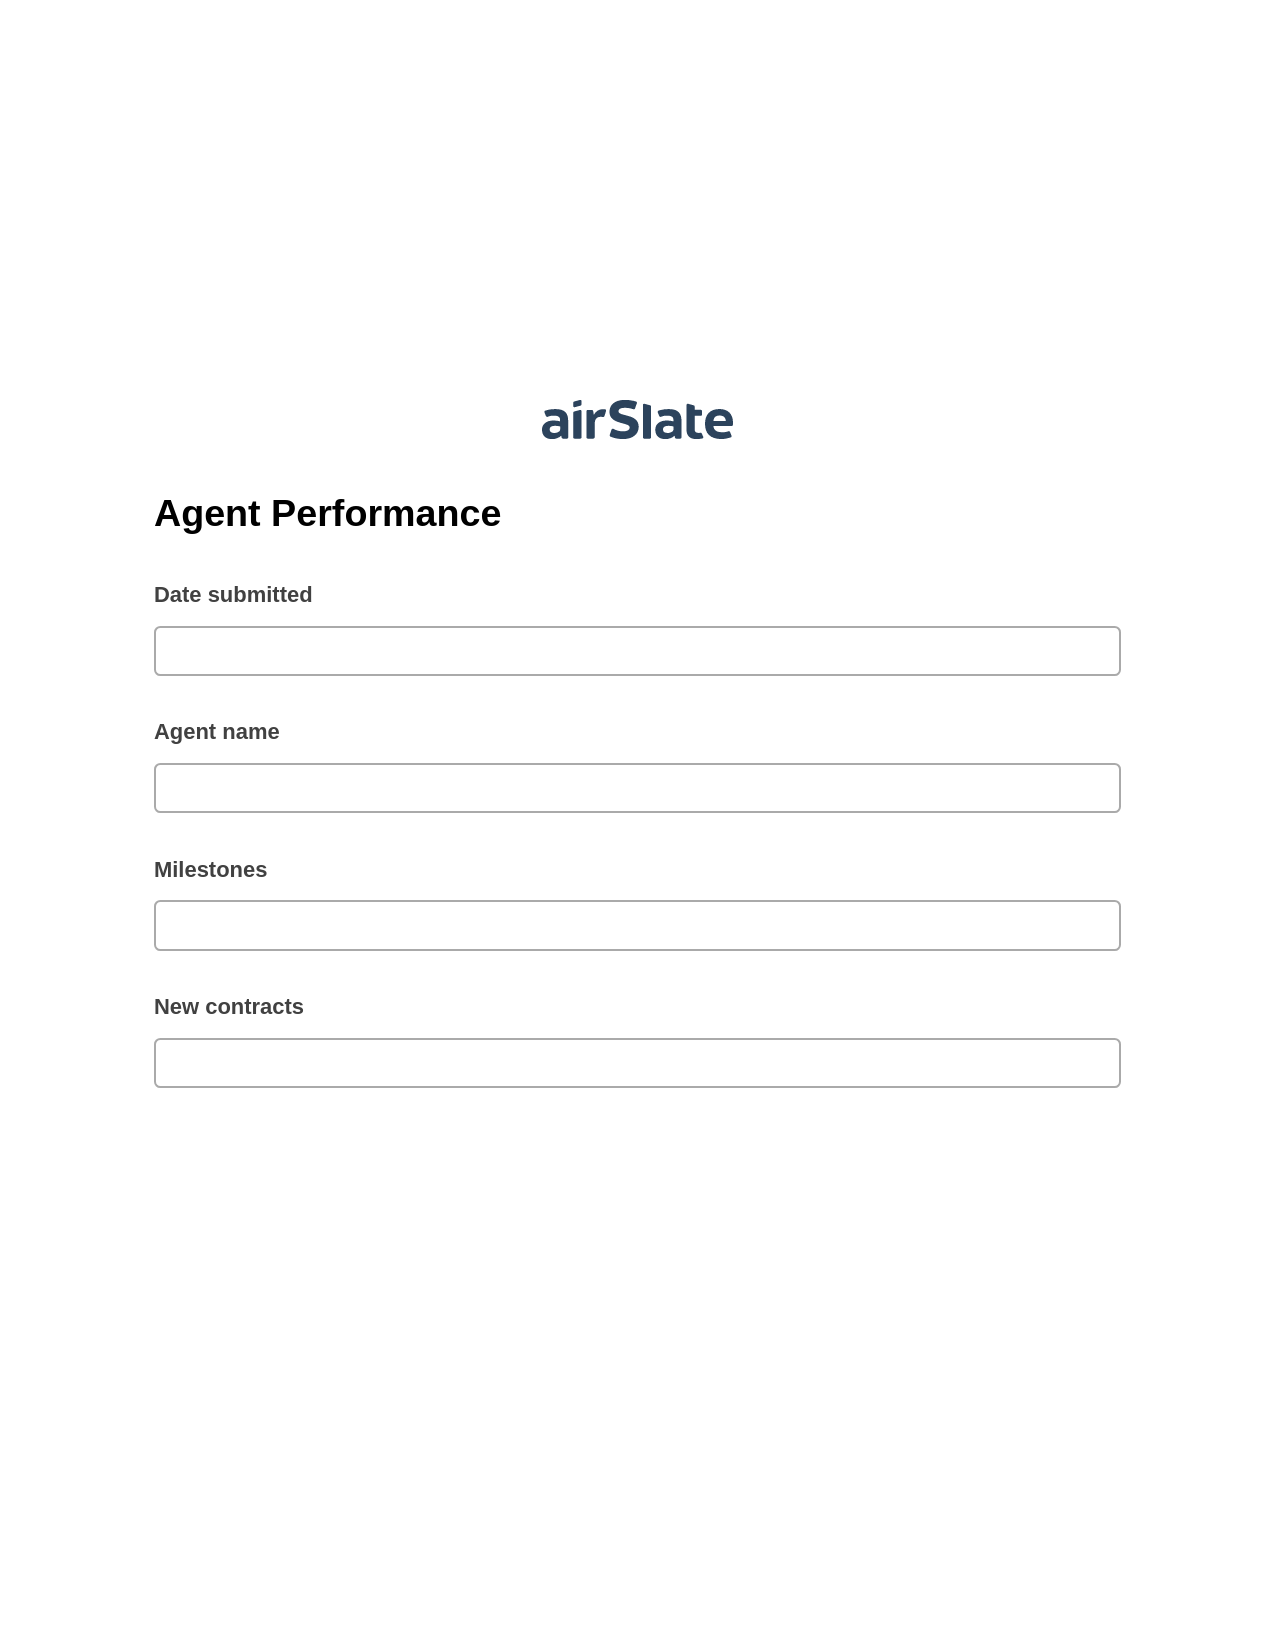 Agent Performance Pre-fill from MySQL Bot, Remove Tags From Slate Bot, Export to Smartsheet